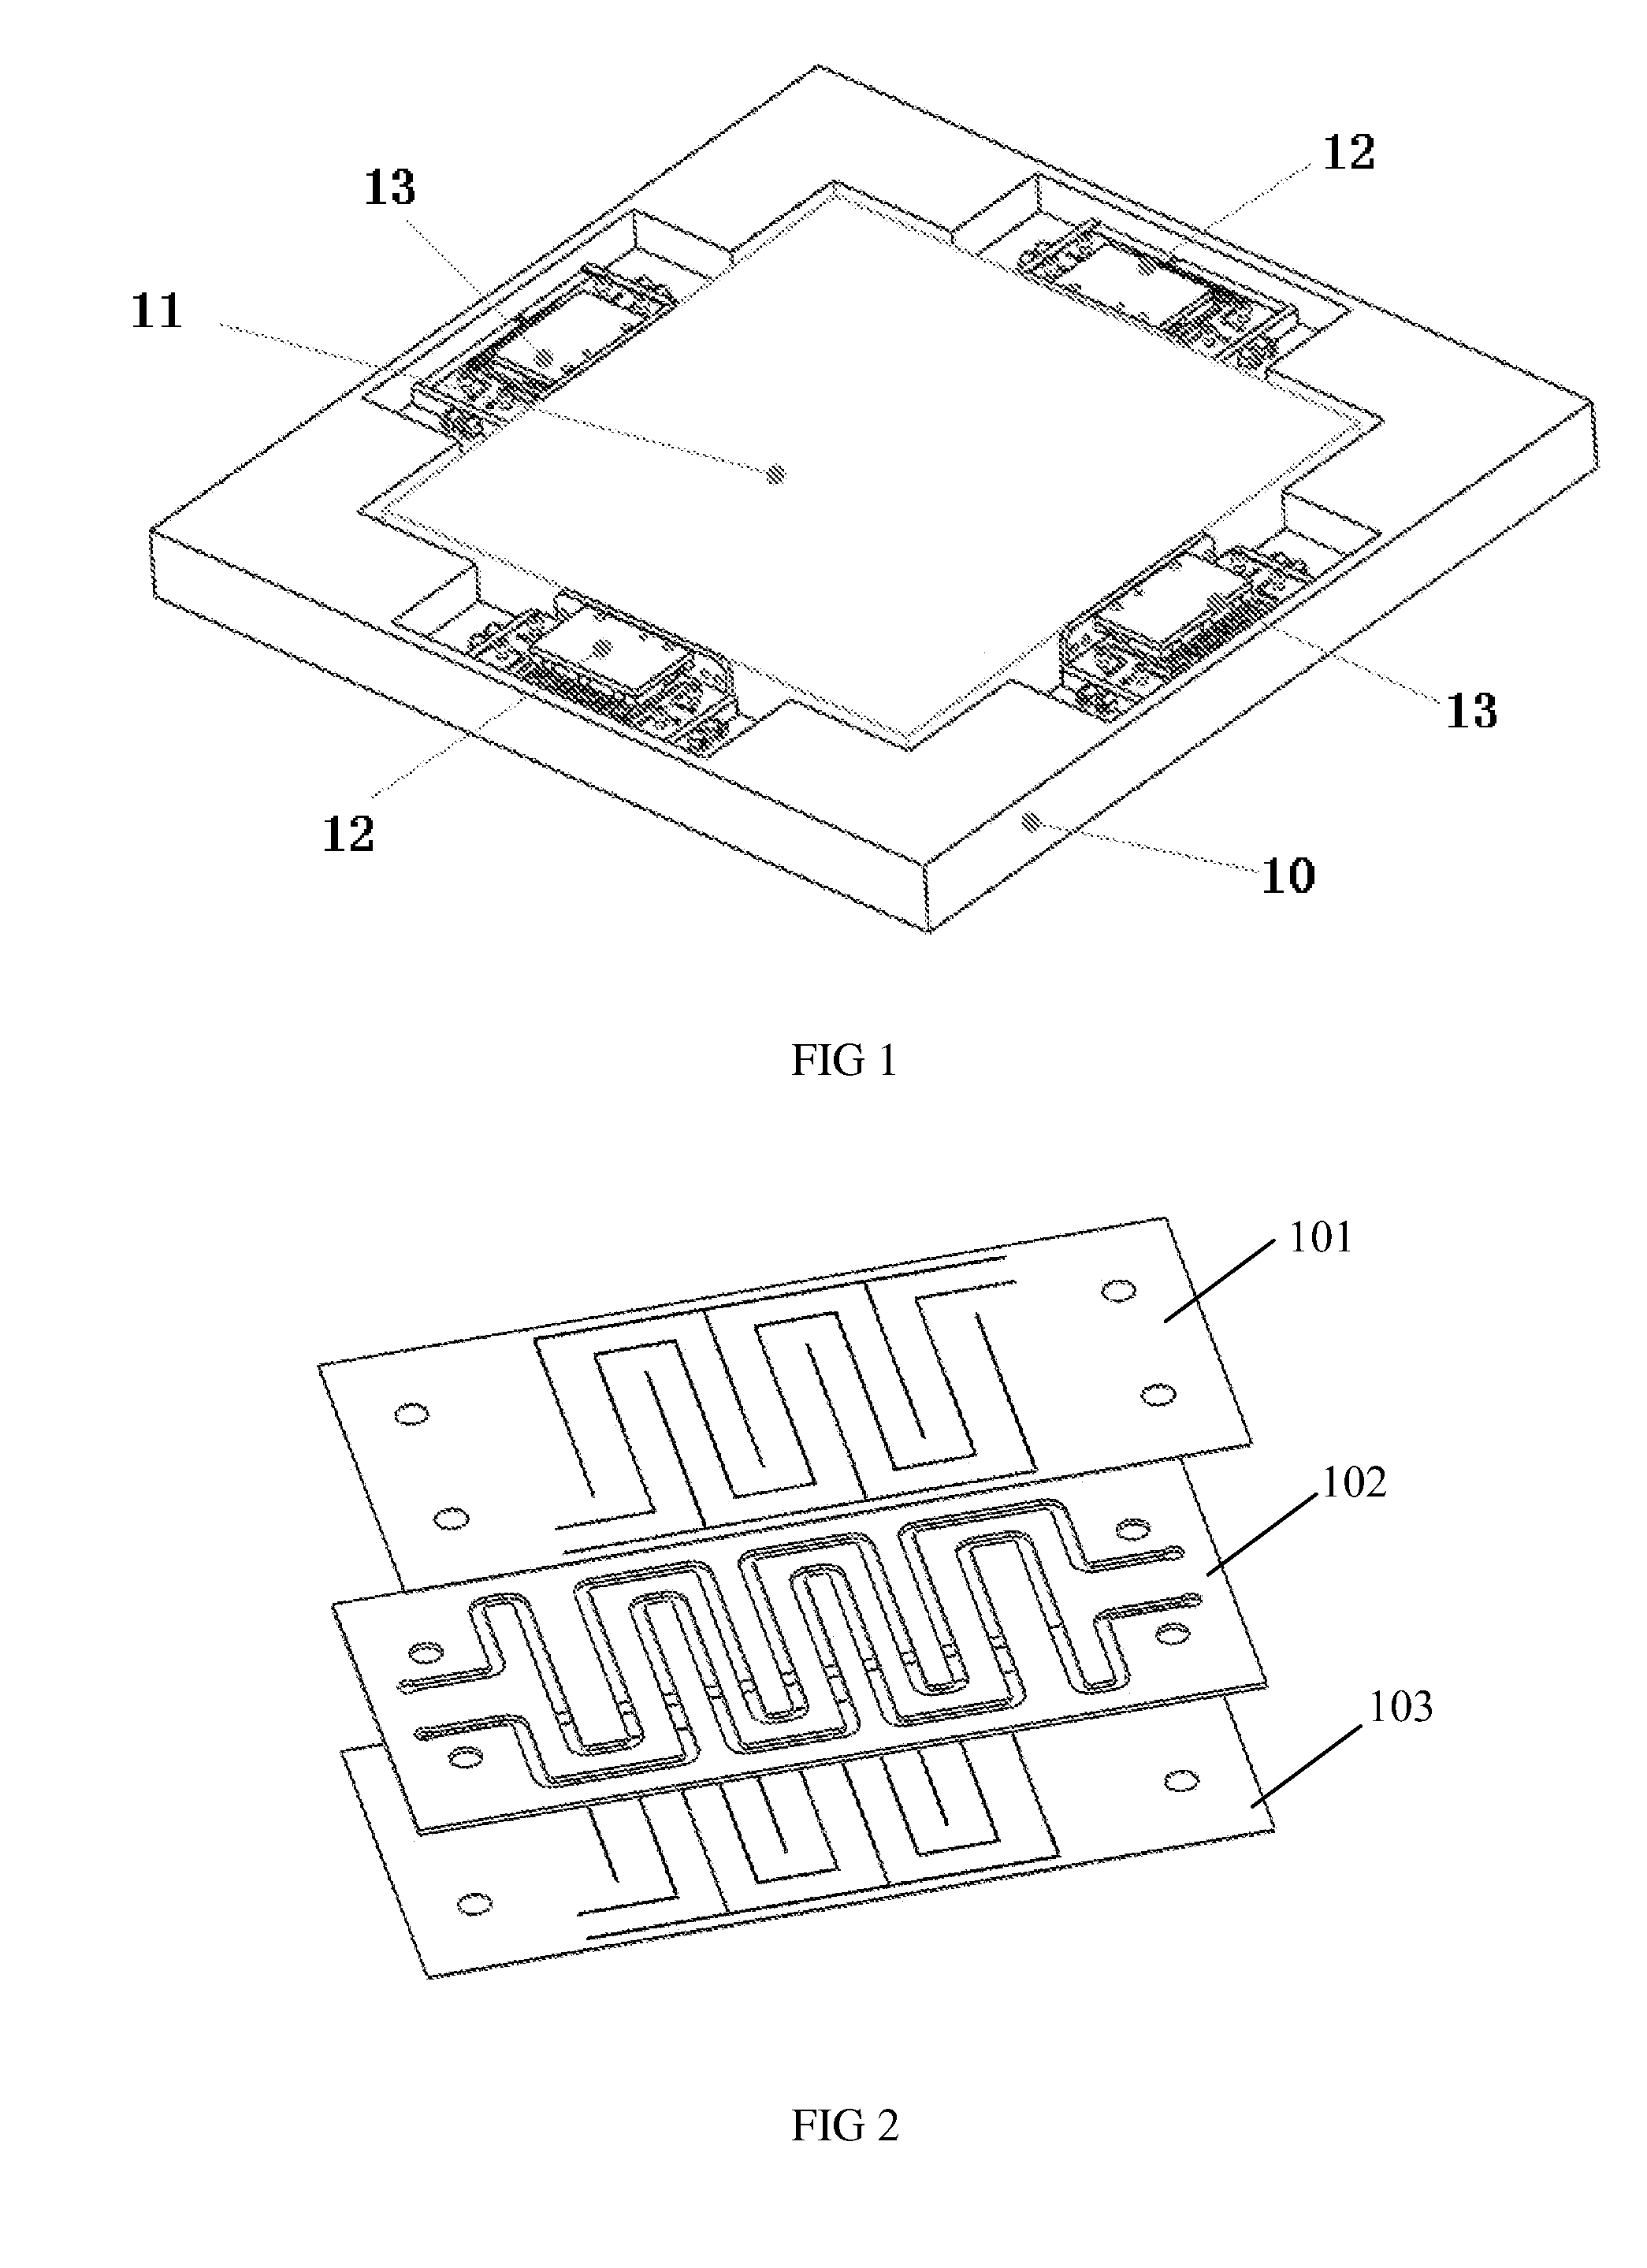 Motor cooling and eddy current suppression structure